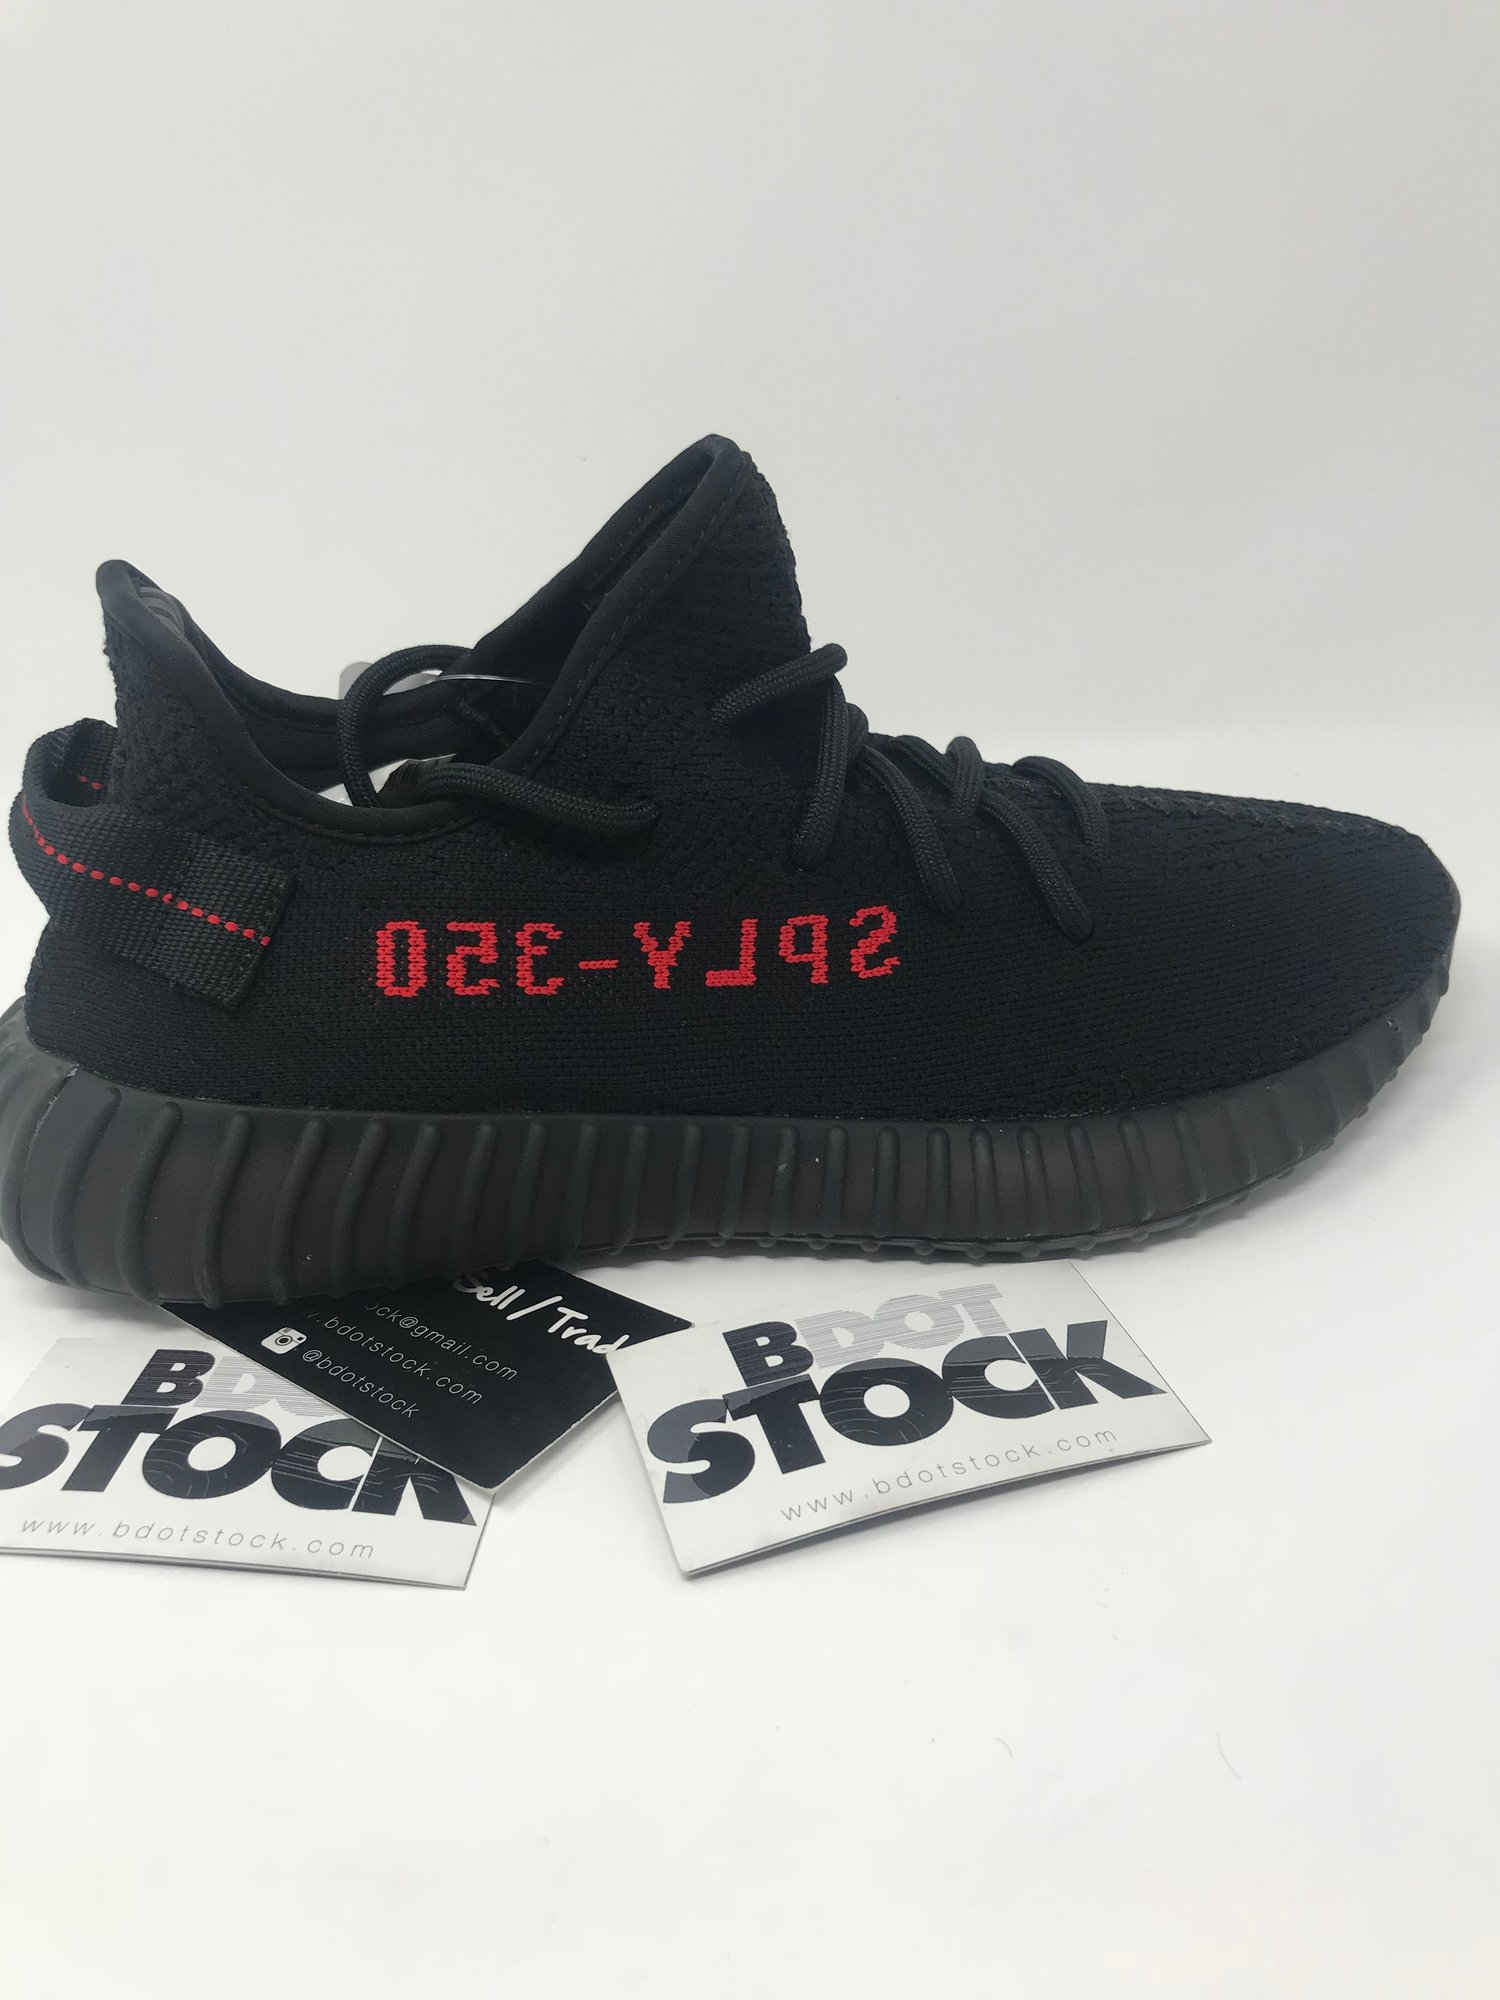 Image of Adidas Yeezy Boost 350 V2 "Bred" 